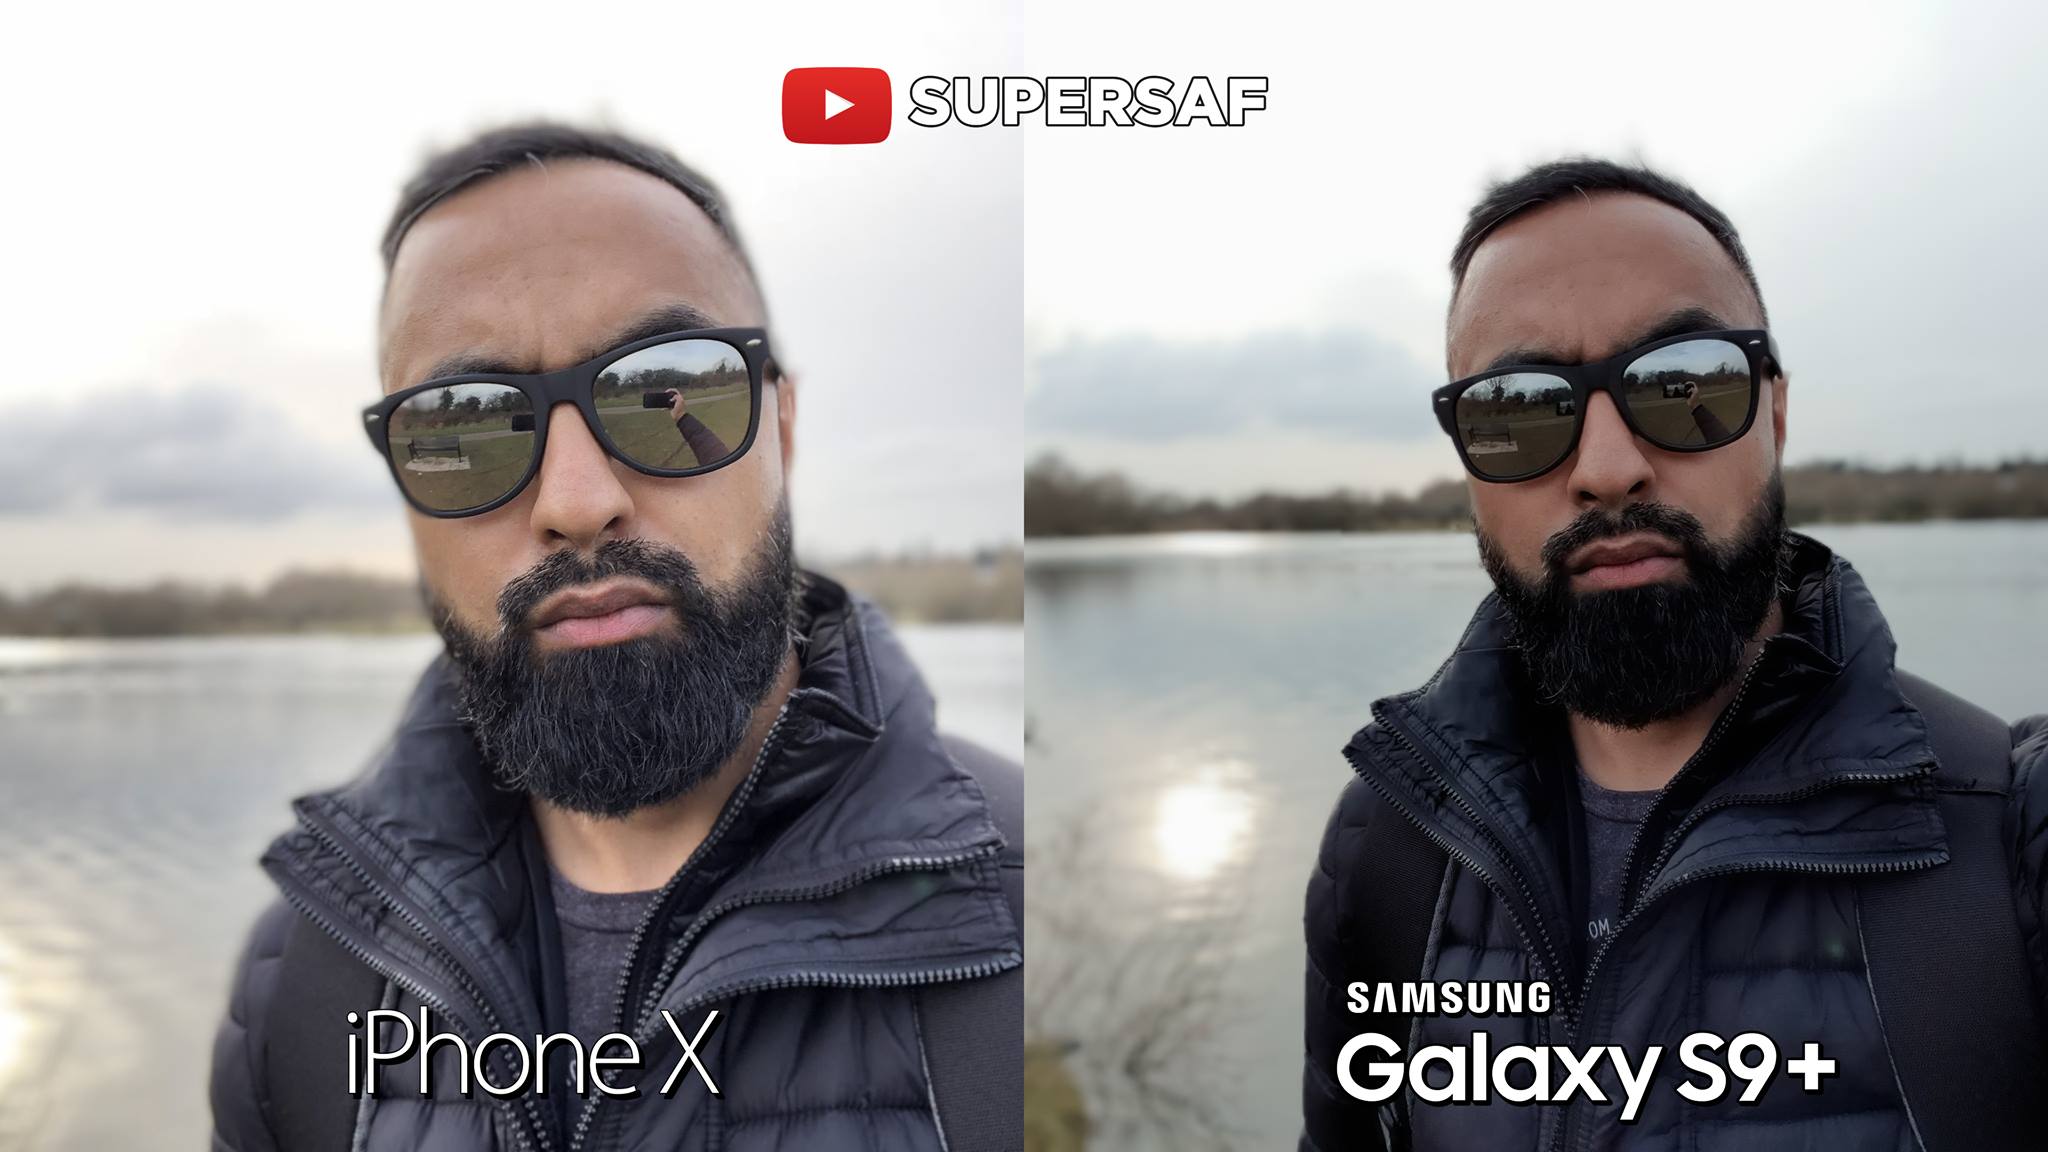 Inhale Harmful until now Safwan AhmedMia on Twitter: "ICYMI: Yesterday's SuperSaf Style Camera  Comparison between the Samsung Galaxy S9 Plus vs iPhone X 😎 Which do you  prefer? Watch the full video here ▻▻▻ https://t.co/ciHd17tQS3  https://t.co/ct9g6zF8iN" /